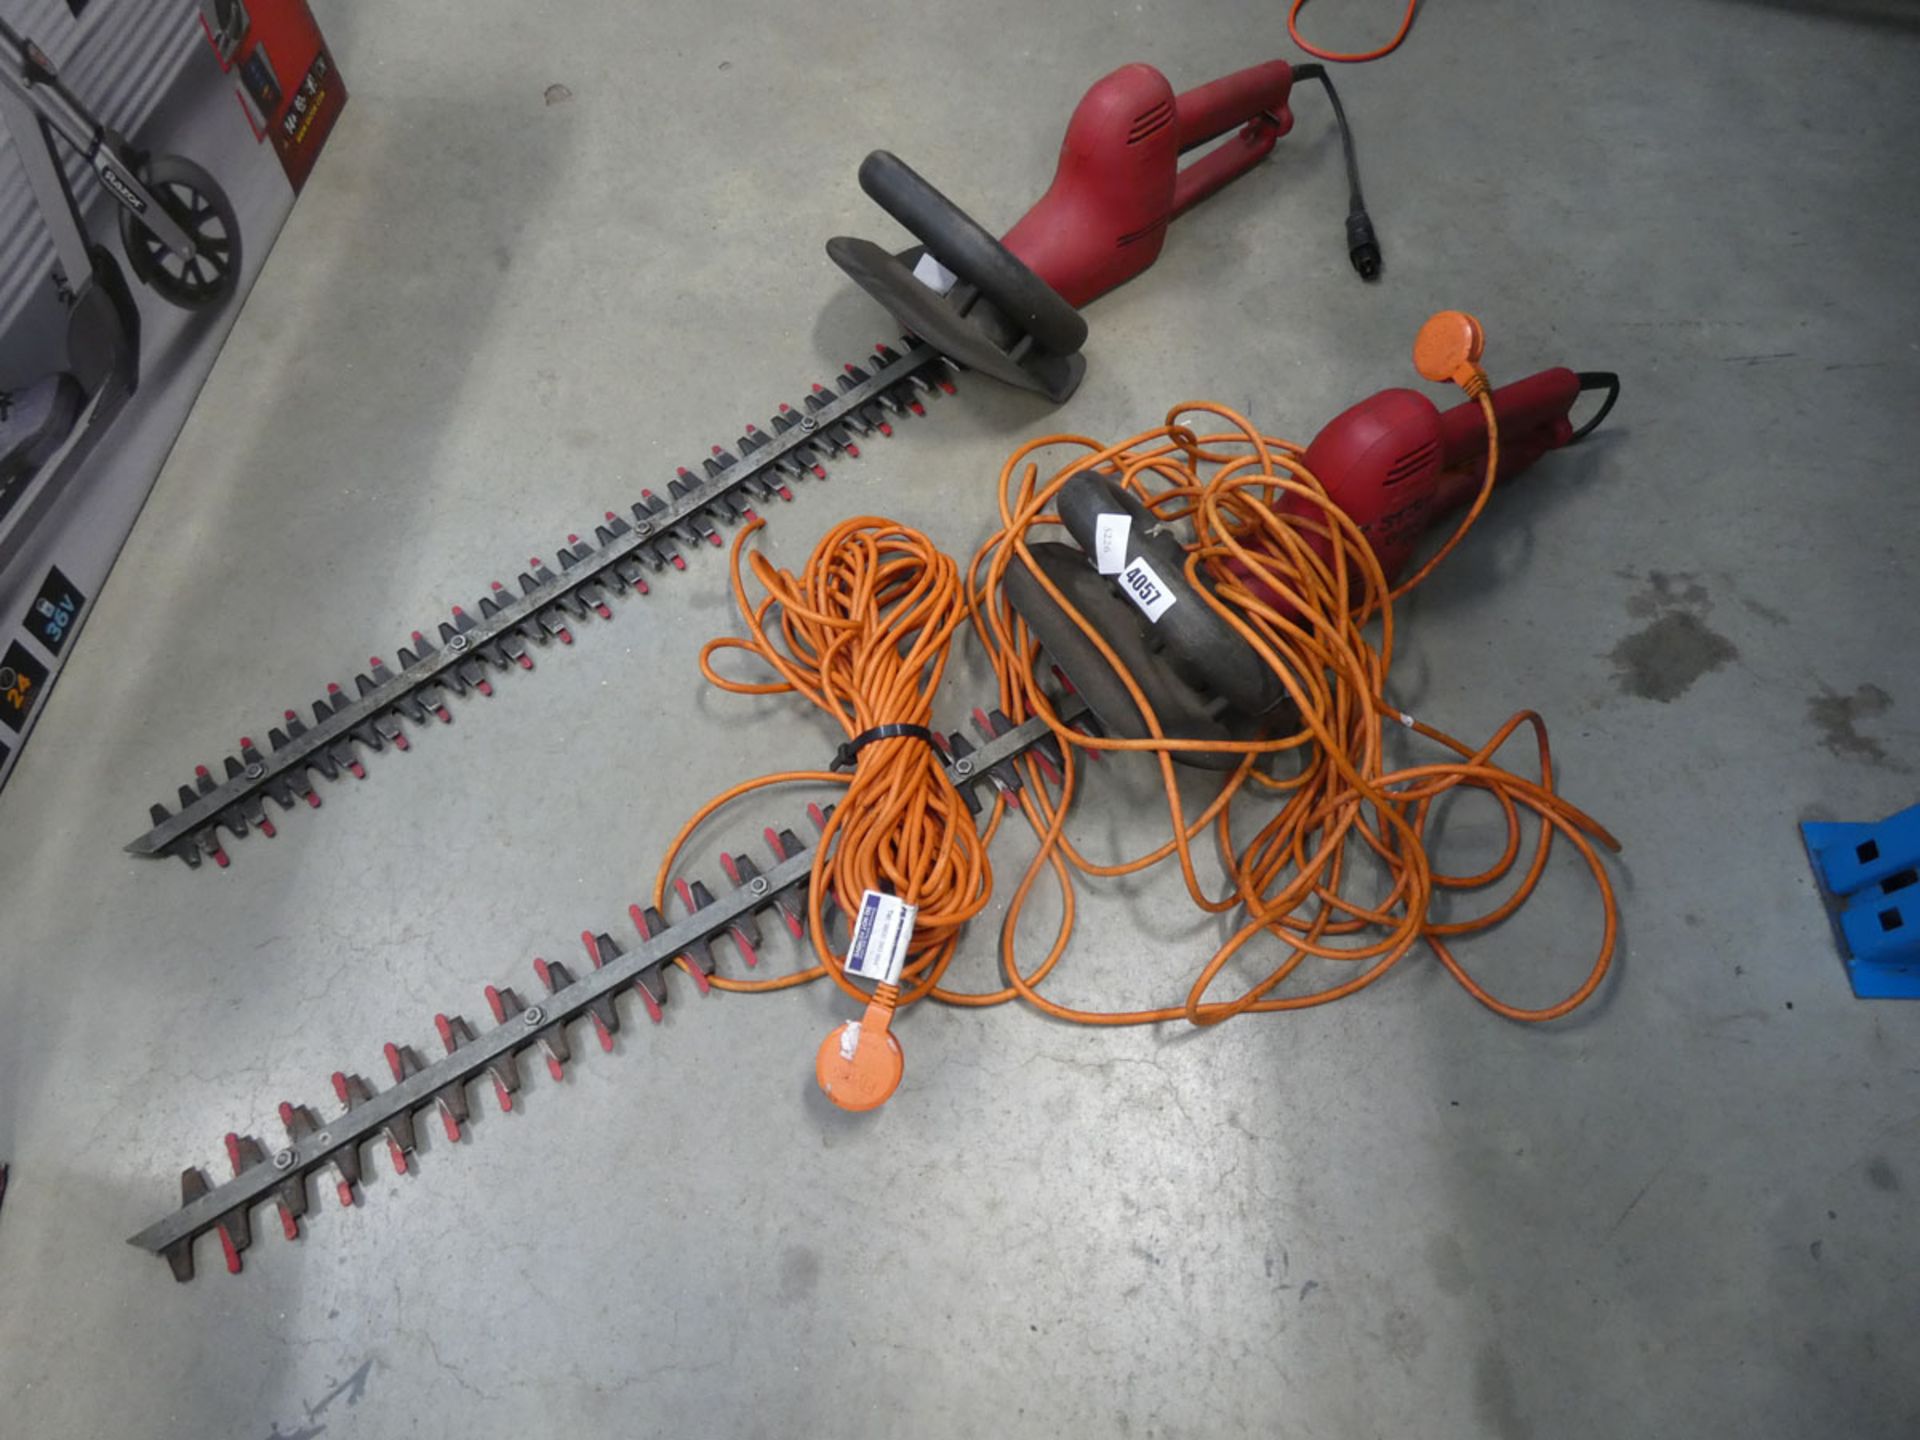 2 red electric hedgecutters